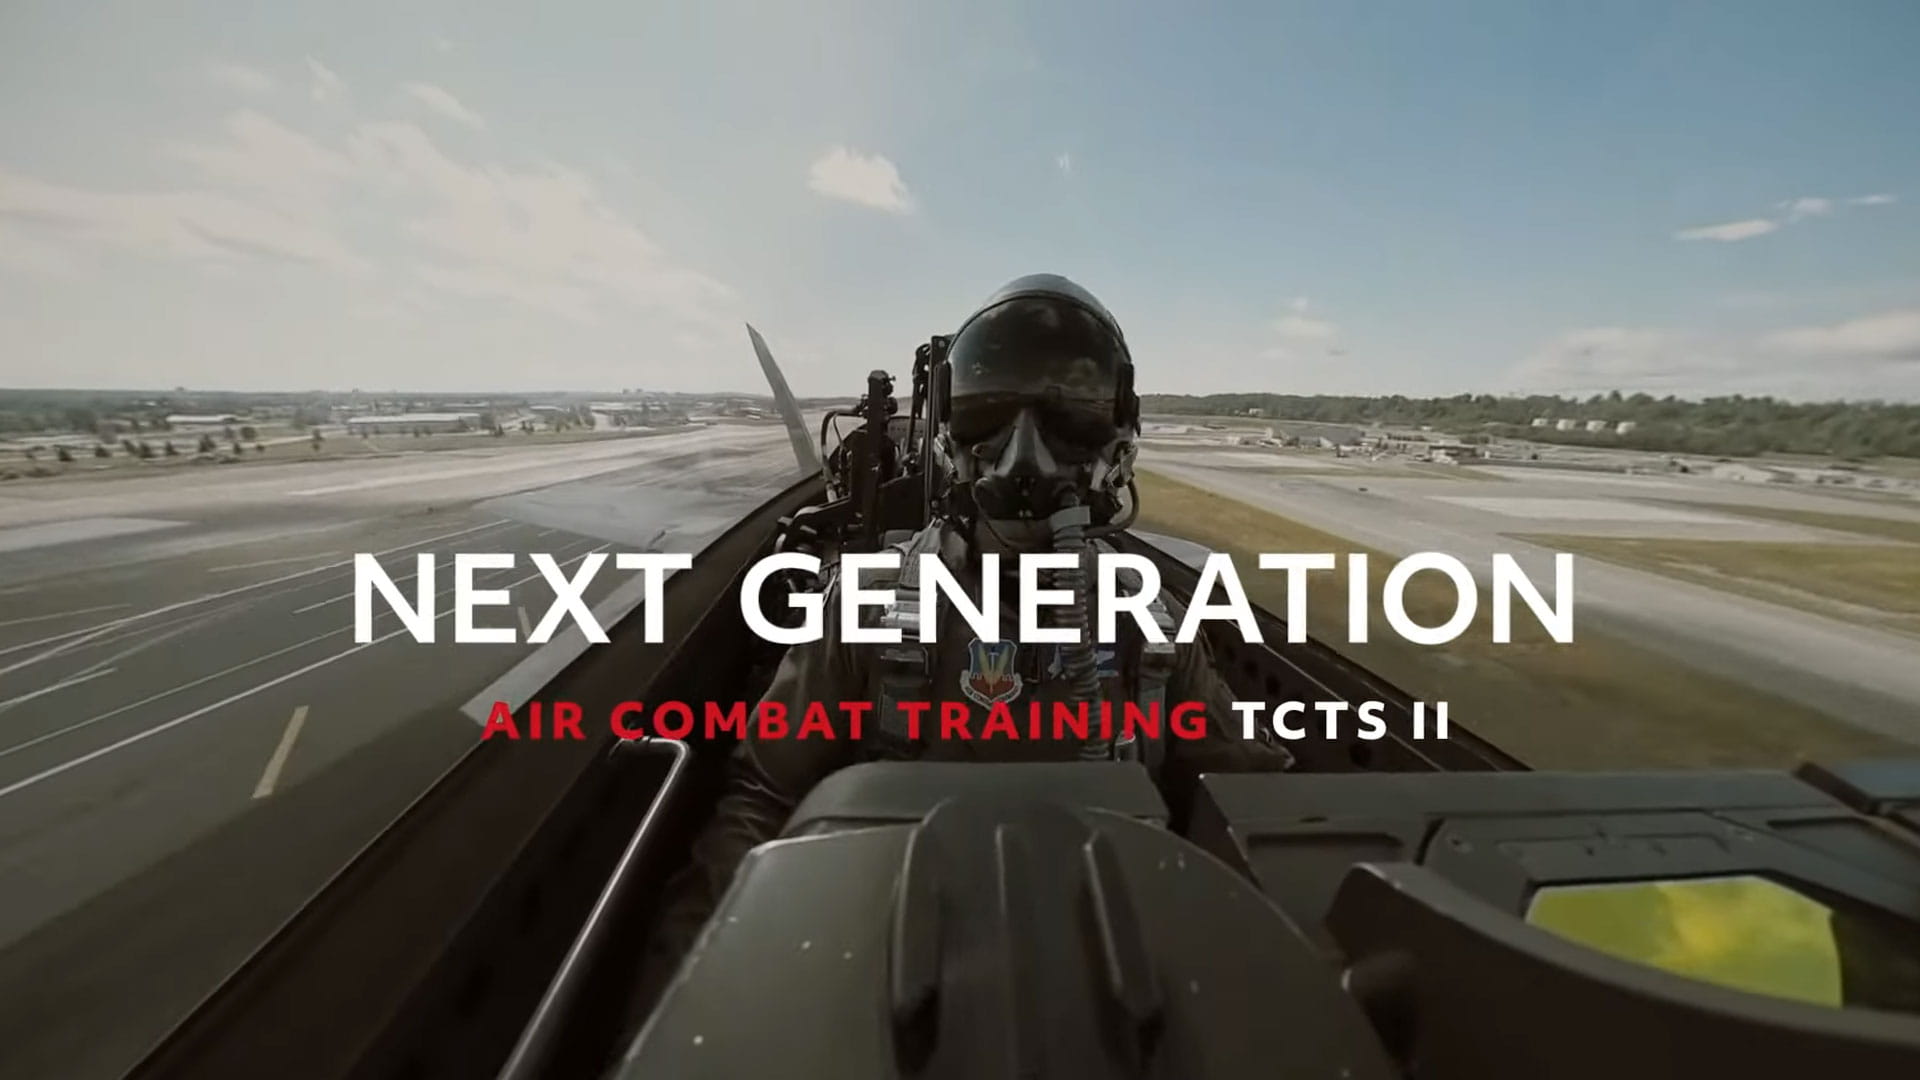 Fighter pilot in jet with the text 'Next Generation Air Combat Training TCTS II' is overlaid